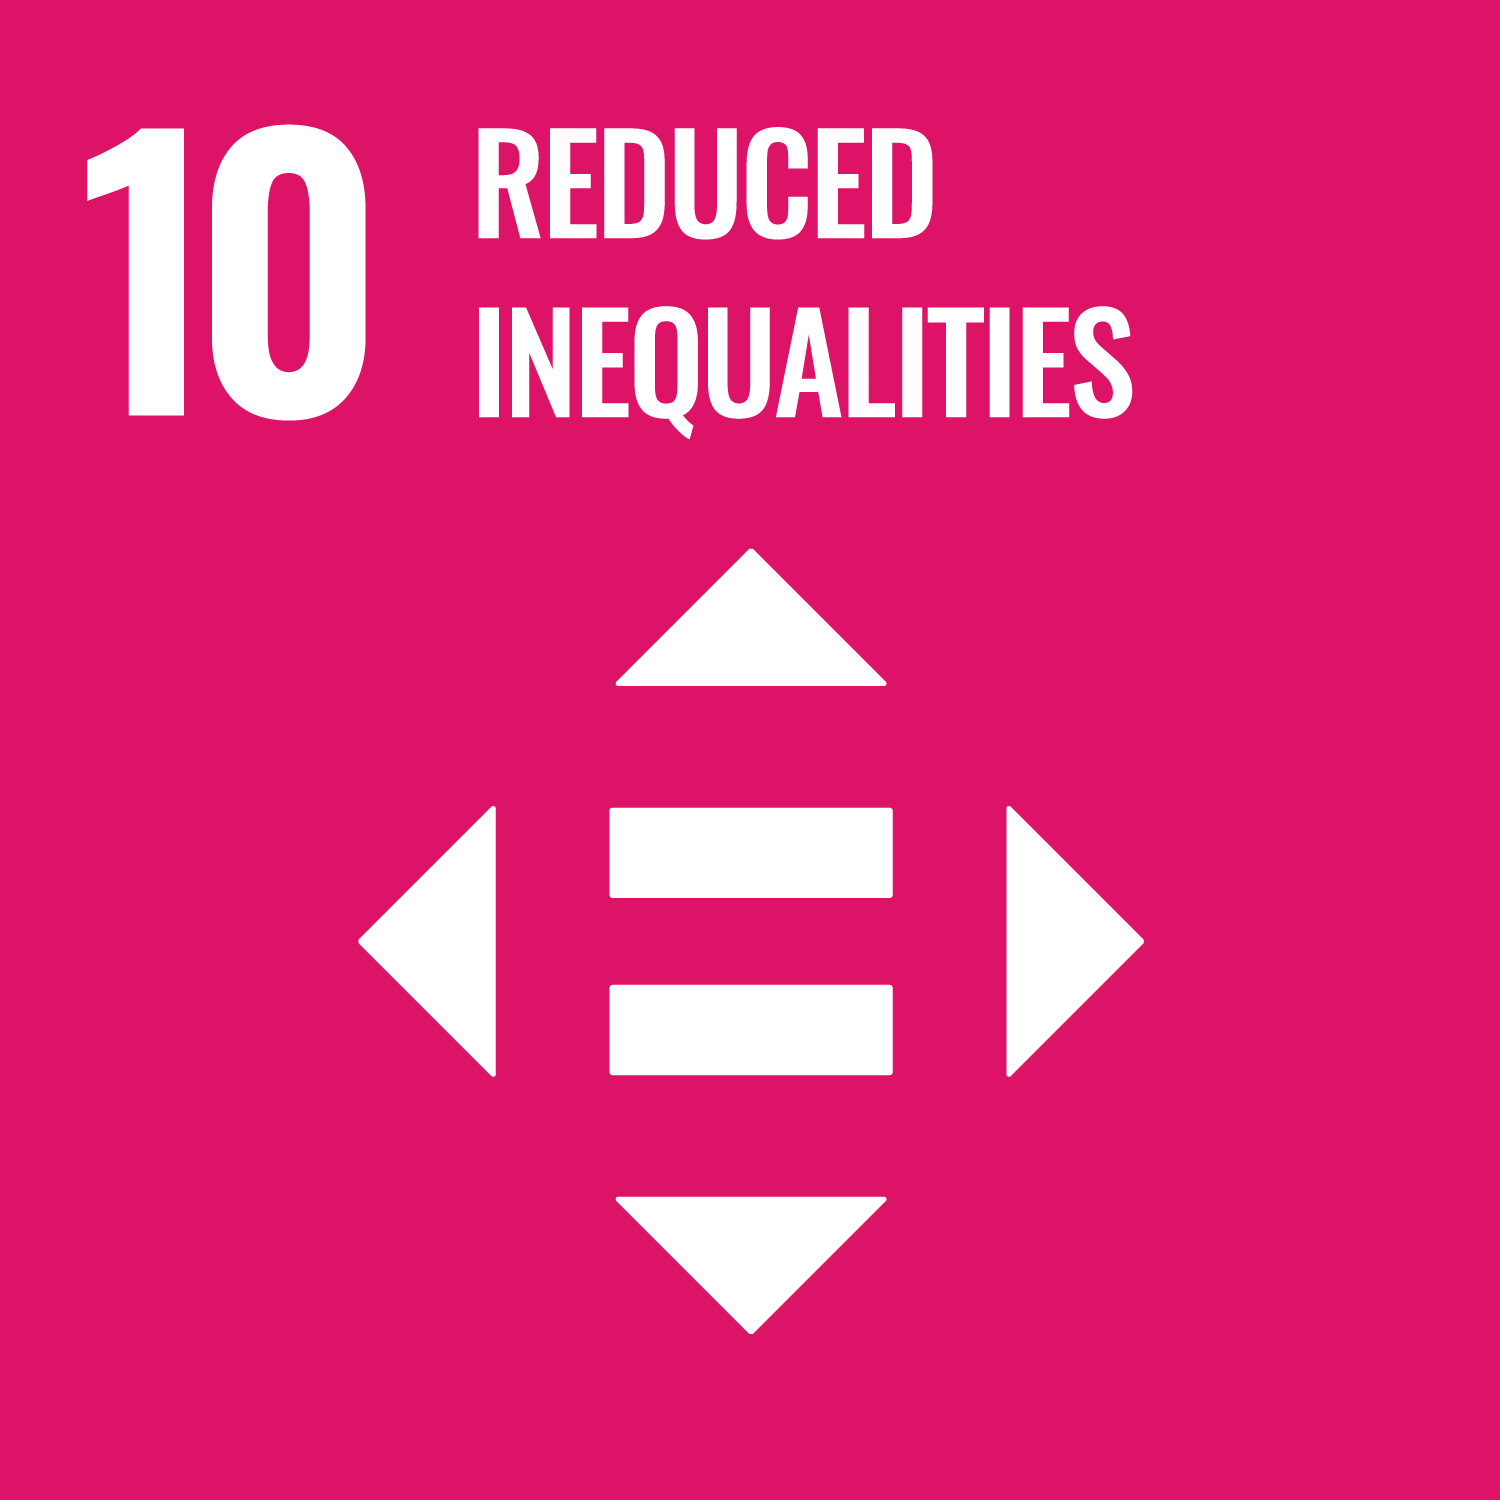 the phrase 10 reduced inequalities in white on a pink background